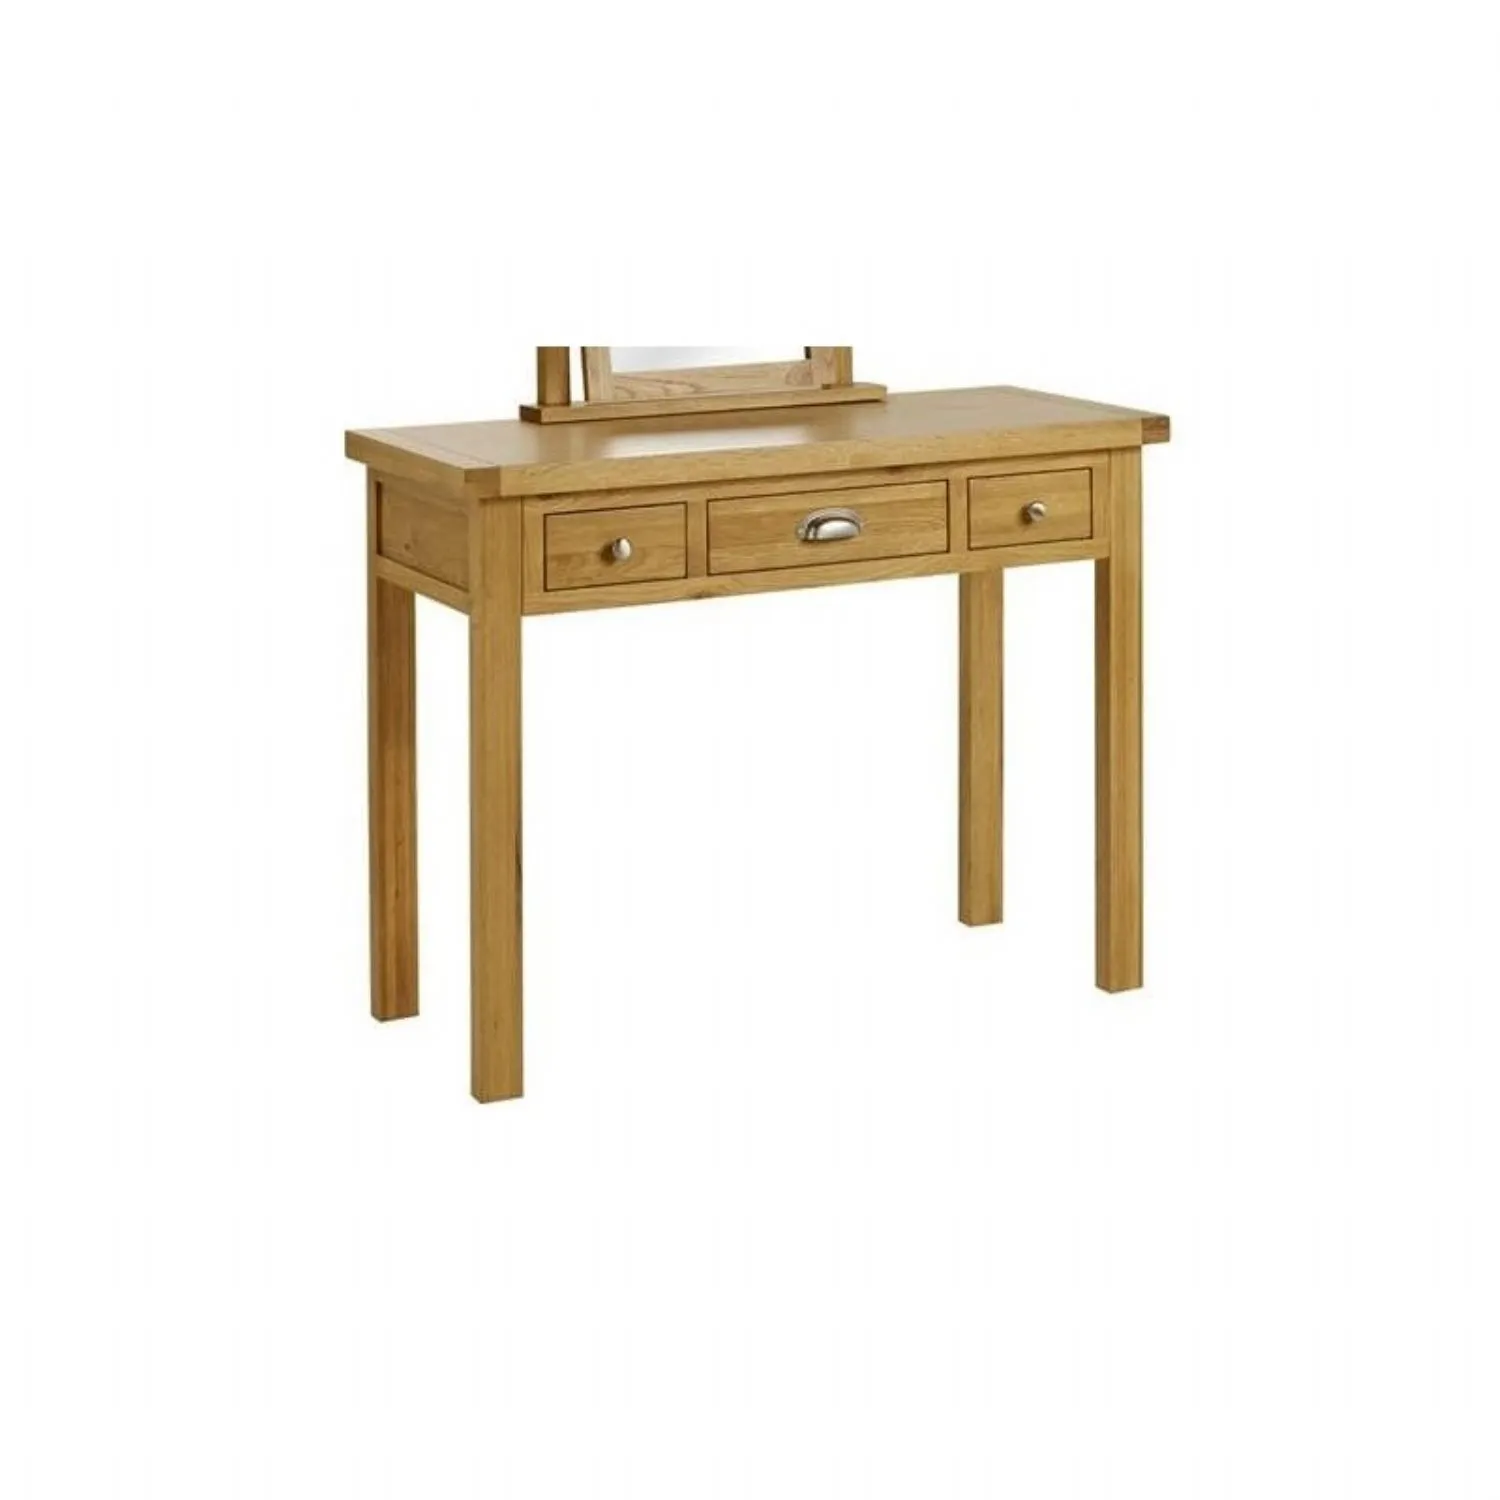 Woburn Oak 3 Drawer Dressing Table with Optional Stool